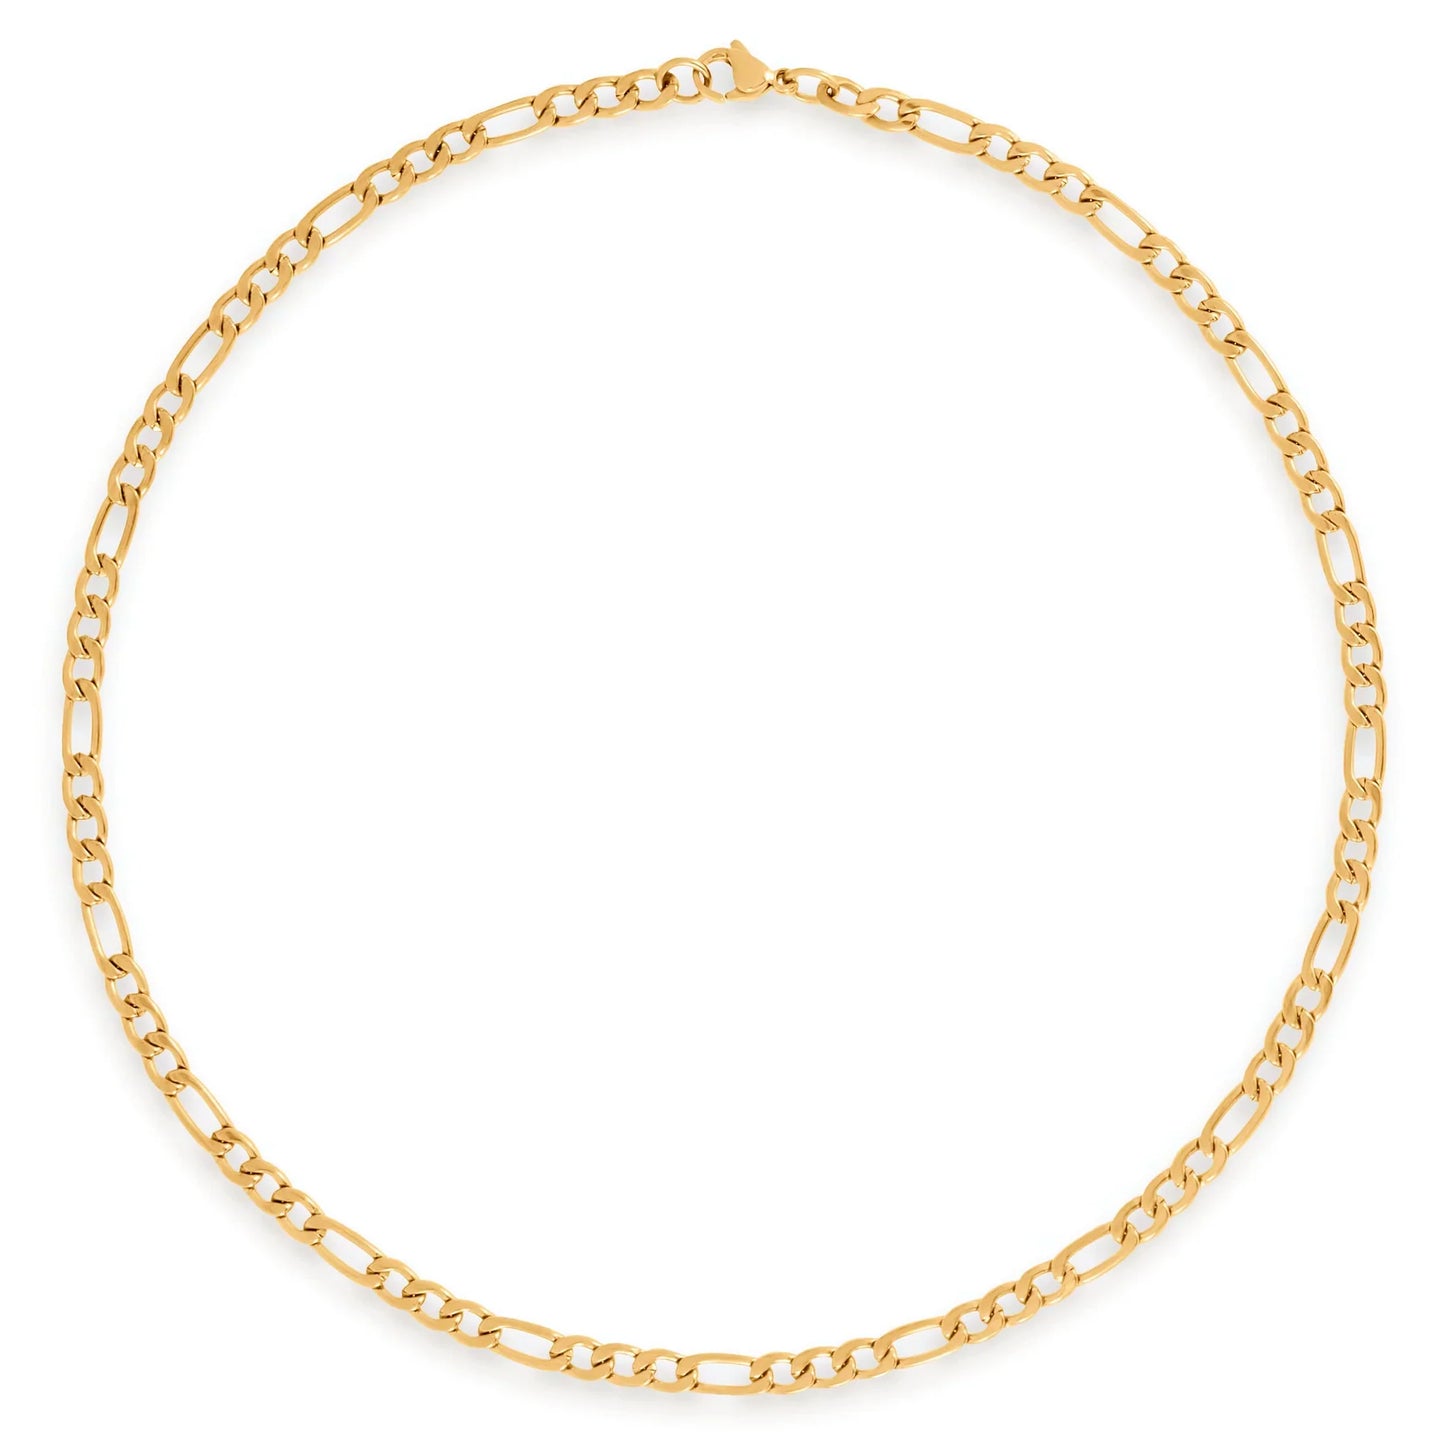 Ellie Vail Emily Figaro Chain Necklace